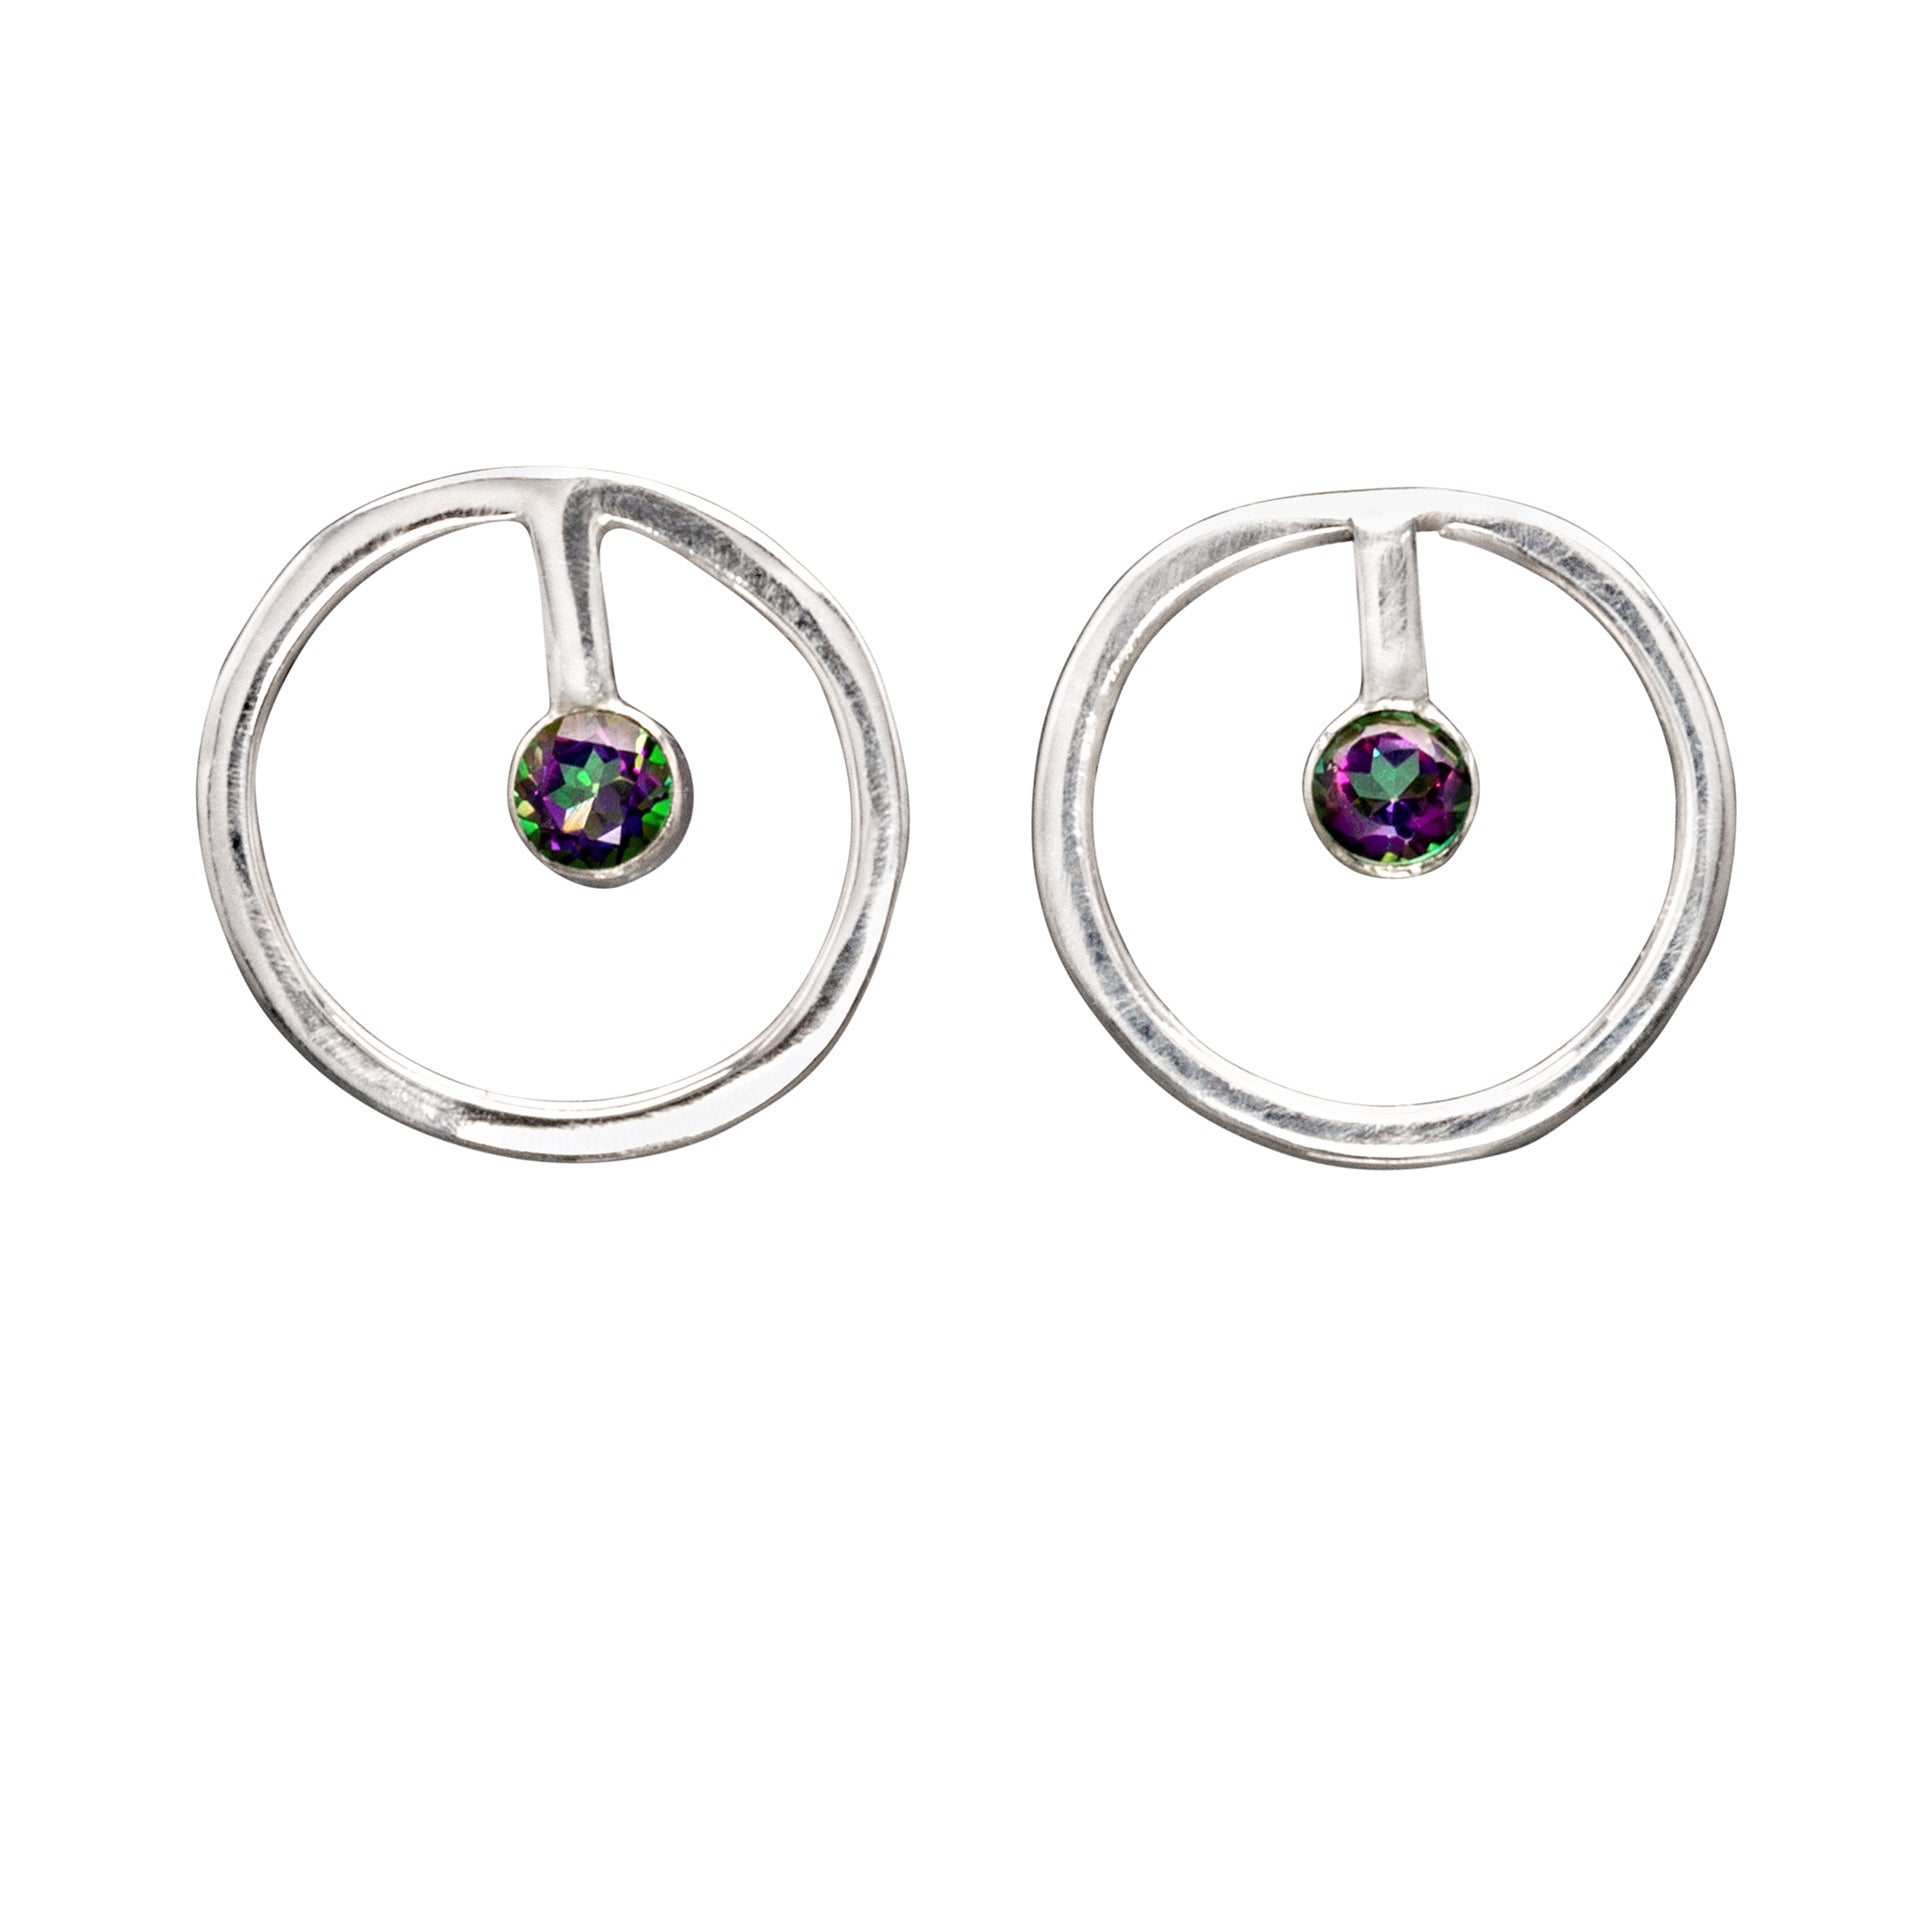 sterling silver circle earrings with green mystic topaz